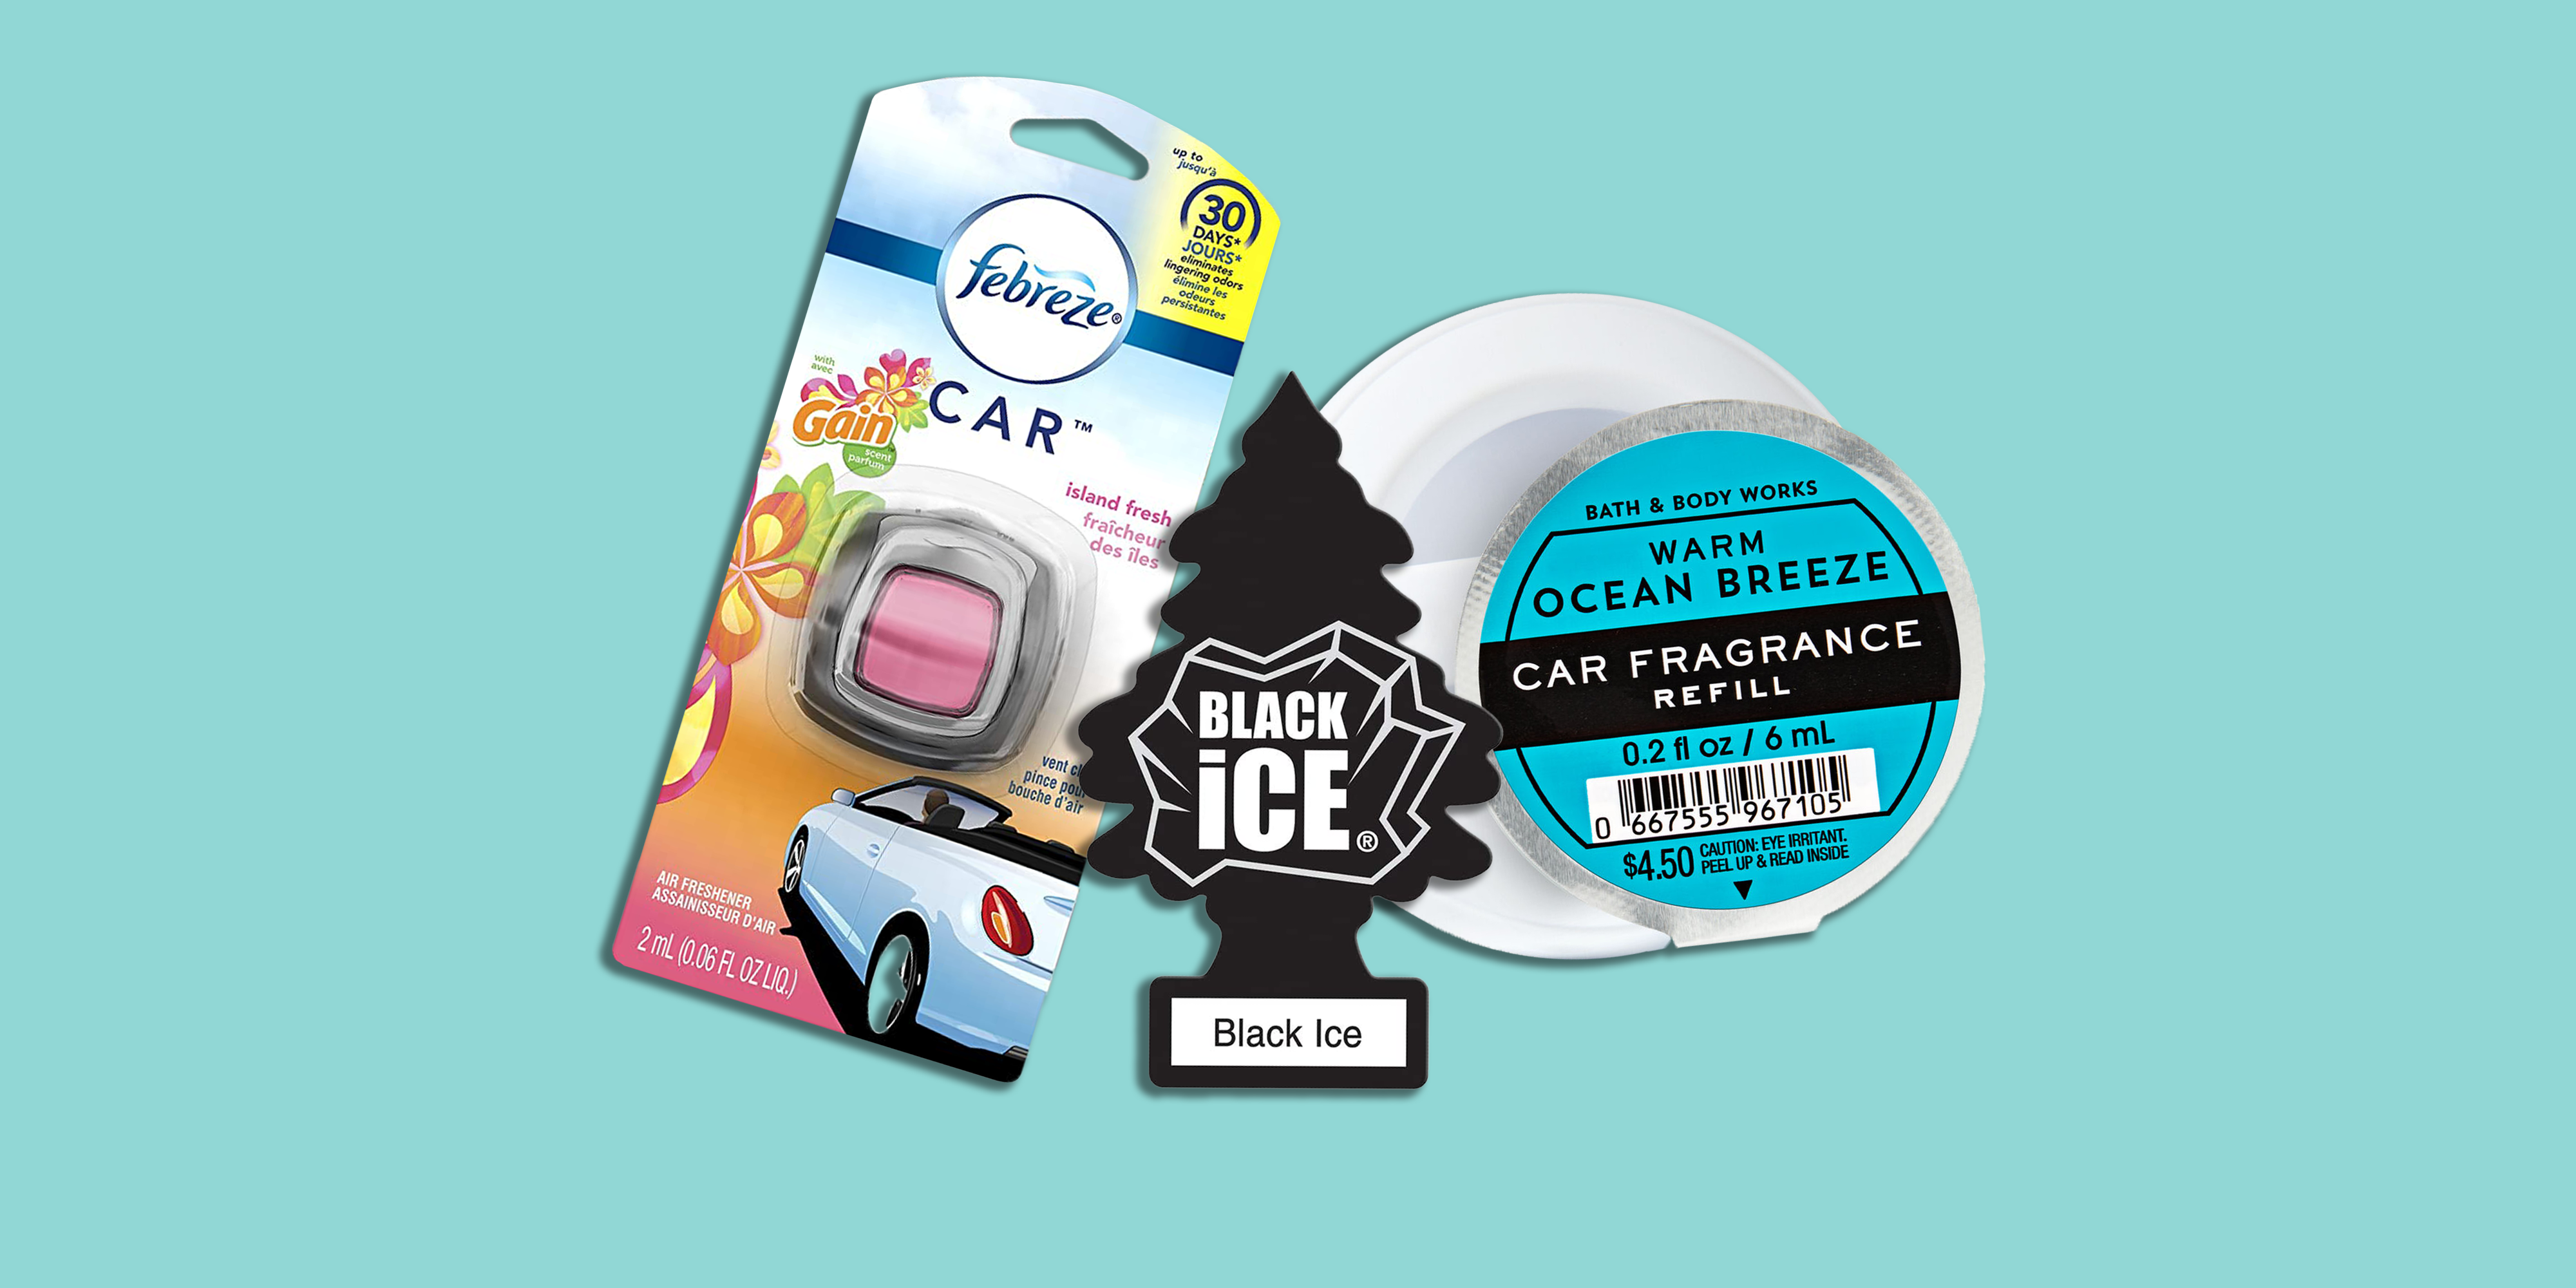 15 Best Car Air Fresheners for 2023 — How to Make Your Car Smell Great